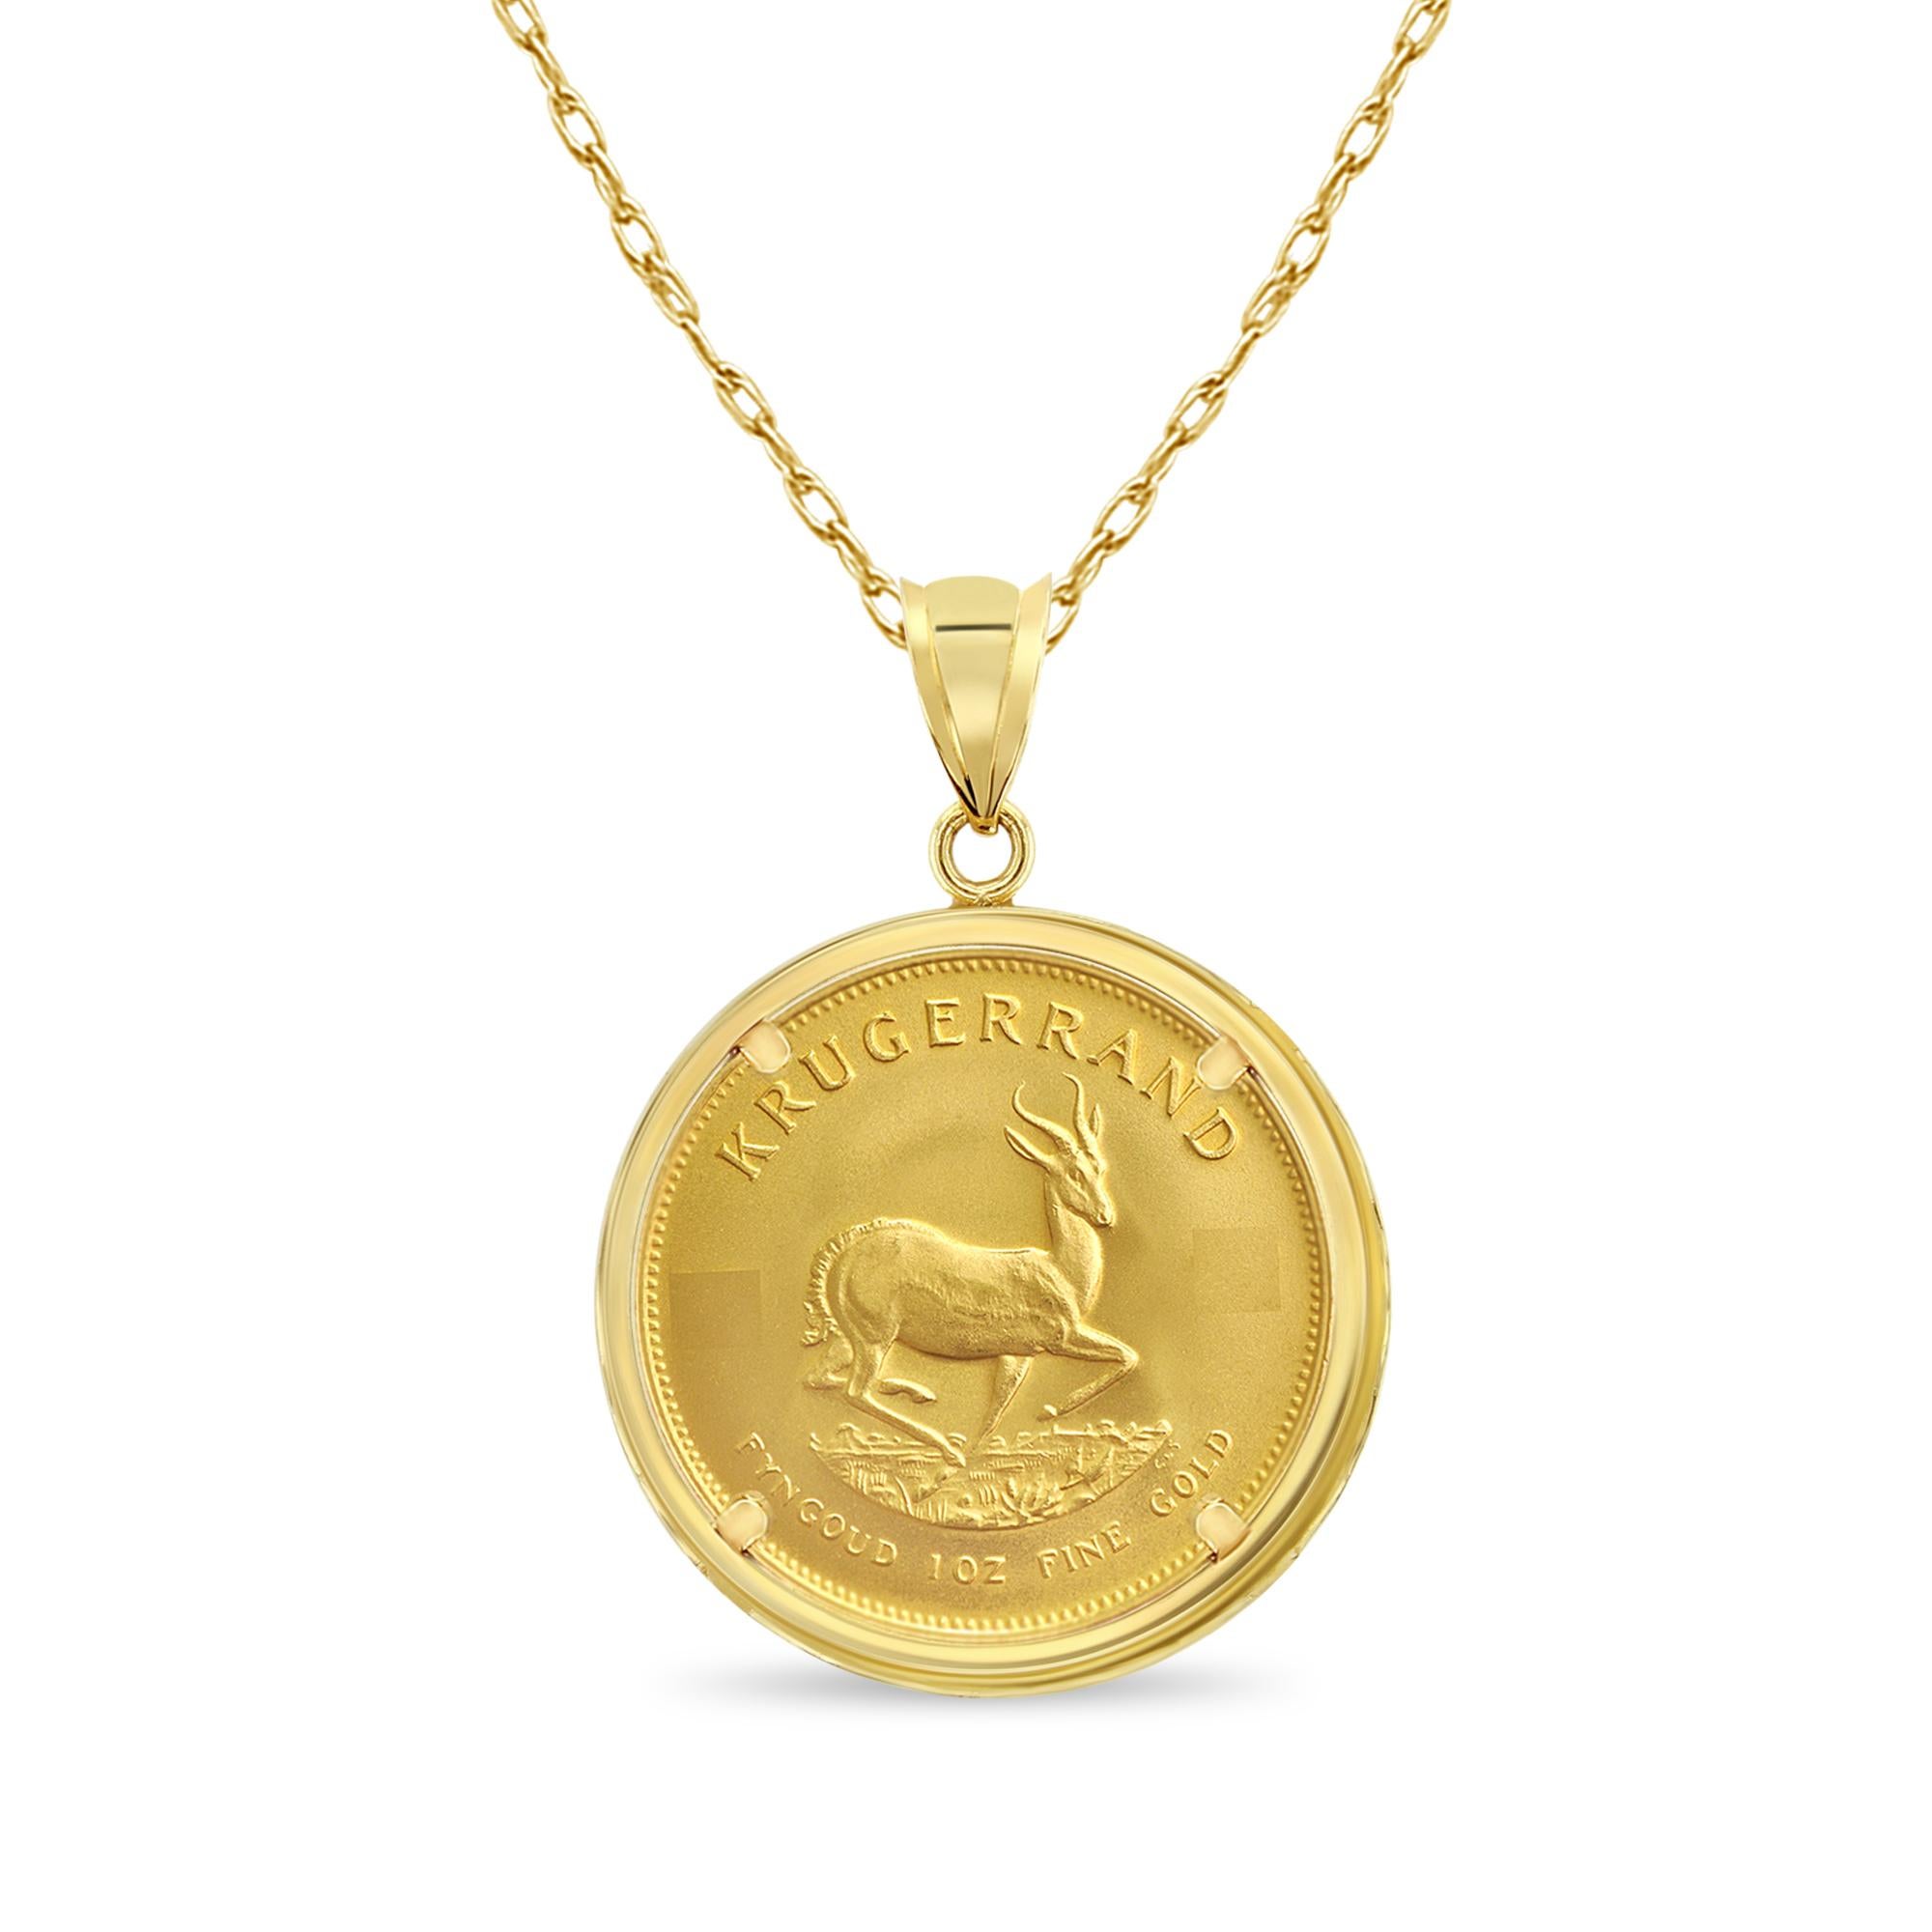 ✱ MADE TO ORDER ✱

♥ Coin Information ♥

Details: South African Krugerrand Gold Coin
Composition: .9167 Gold Ounce
Precious Metal Content: 1OZ
Year: Varies
Diameter: 33mm
Obverse: Paul Kruger
Reverse: Antelope

♥ Bezel Information ♥

Style: Polished